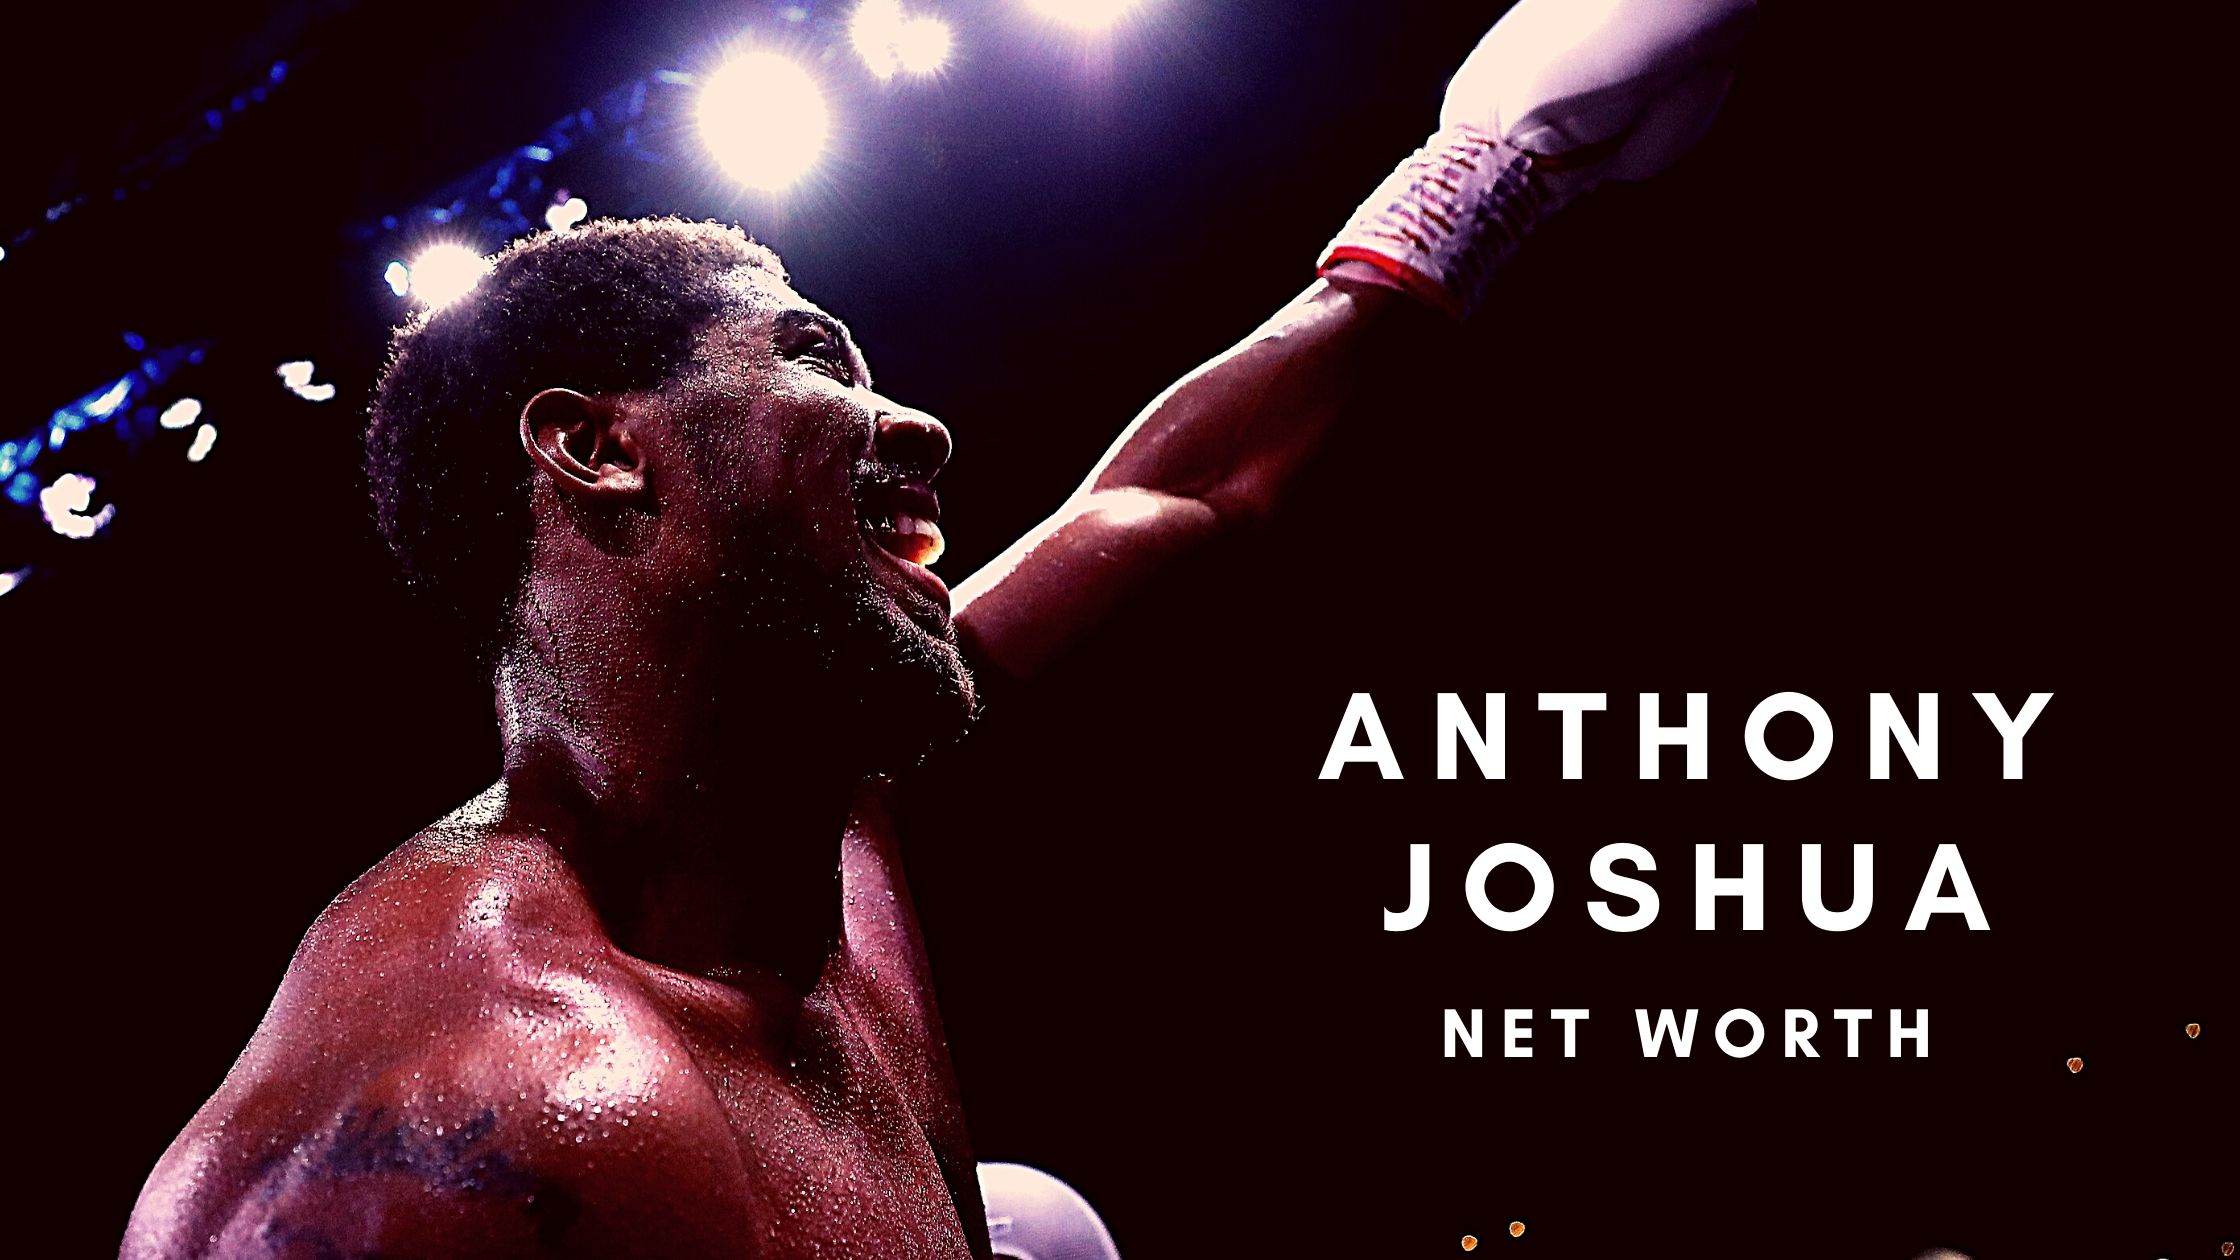 Anthony Joshua has earned a huge net worth thanks to his boxing career